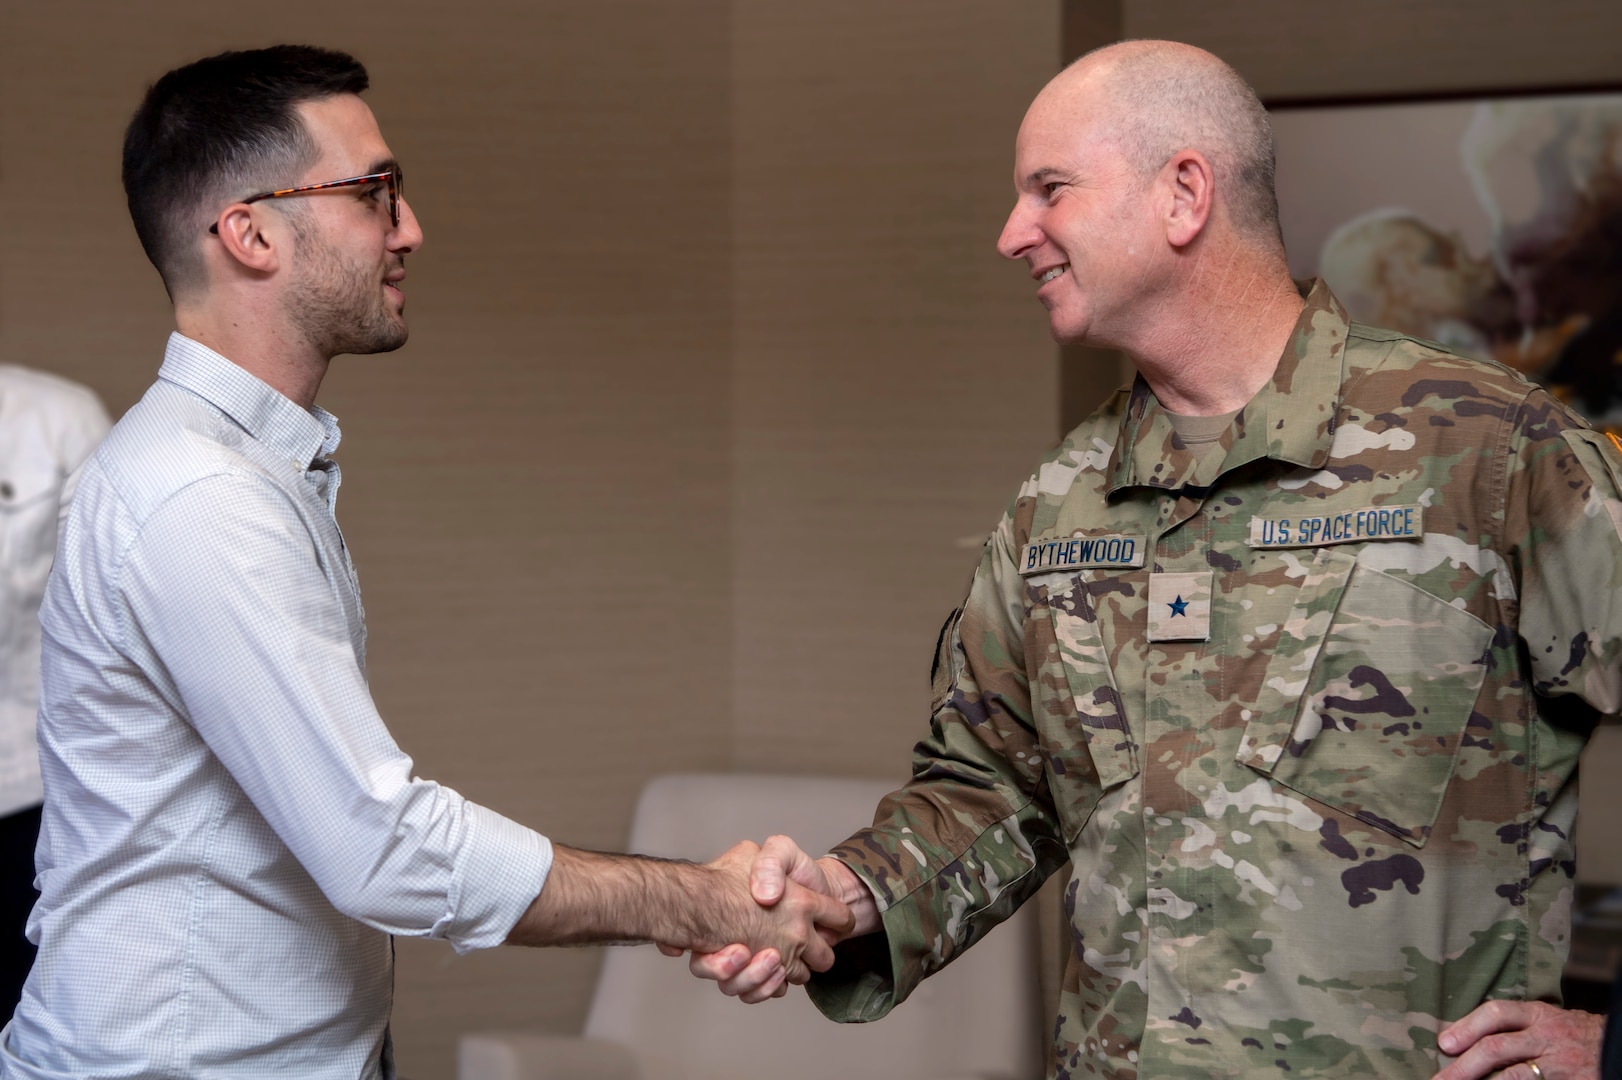 Man in civilian clothes shakes hands with man in military uniform